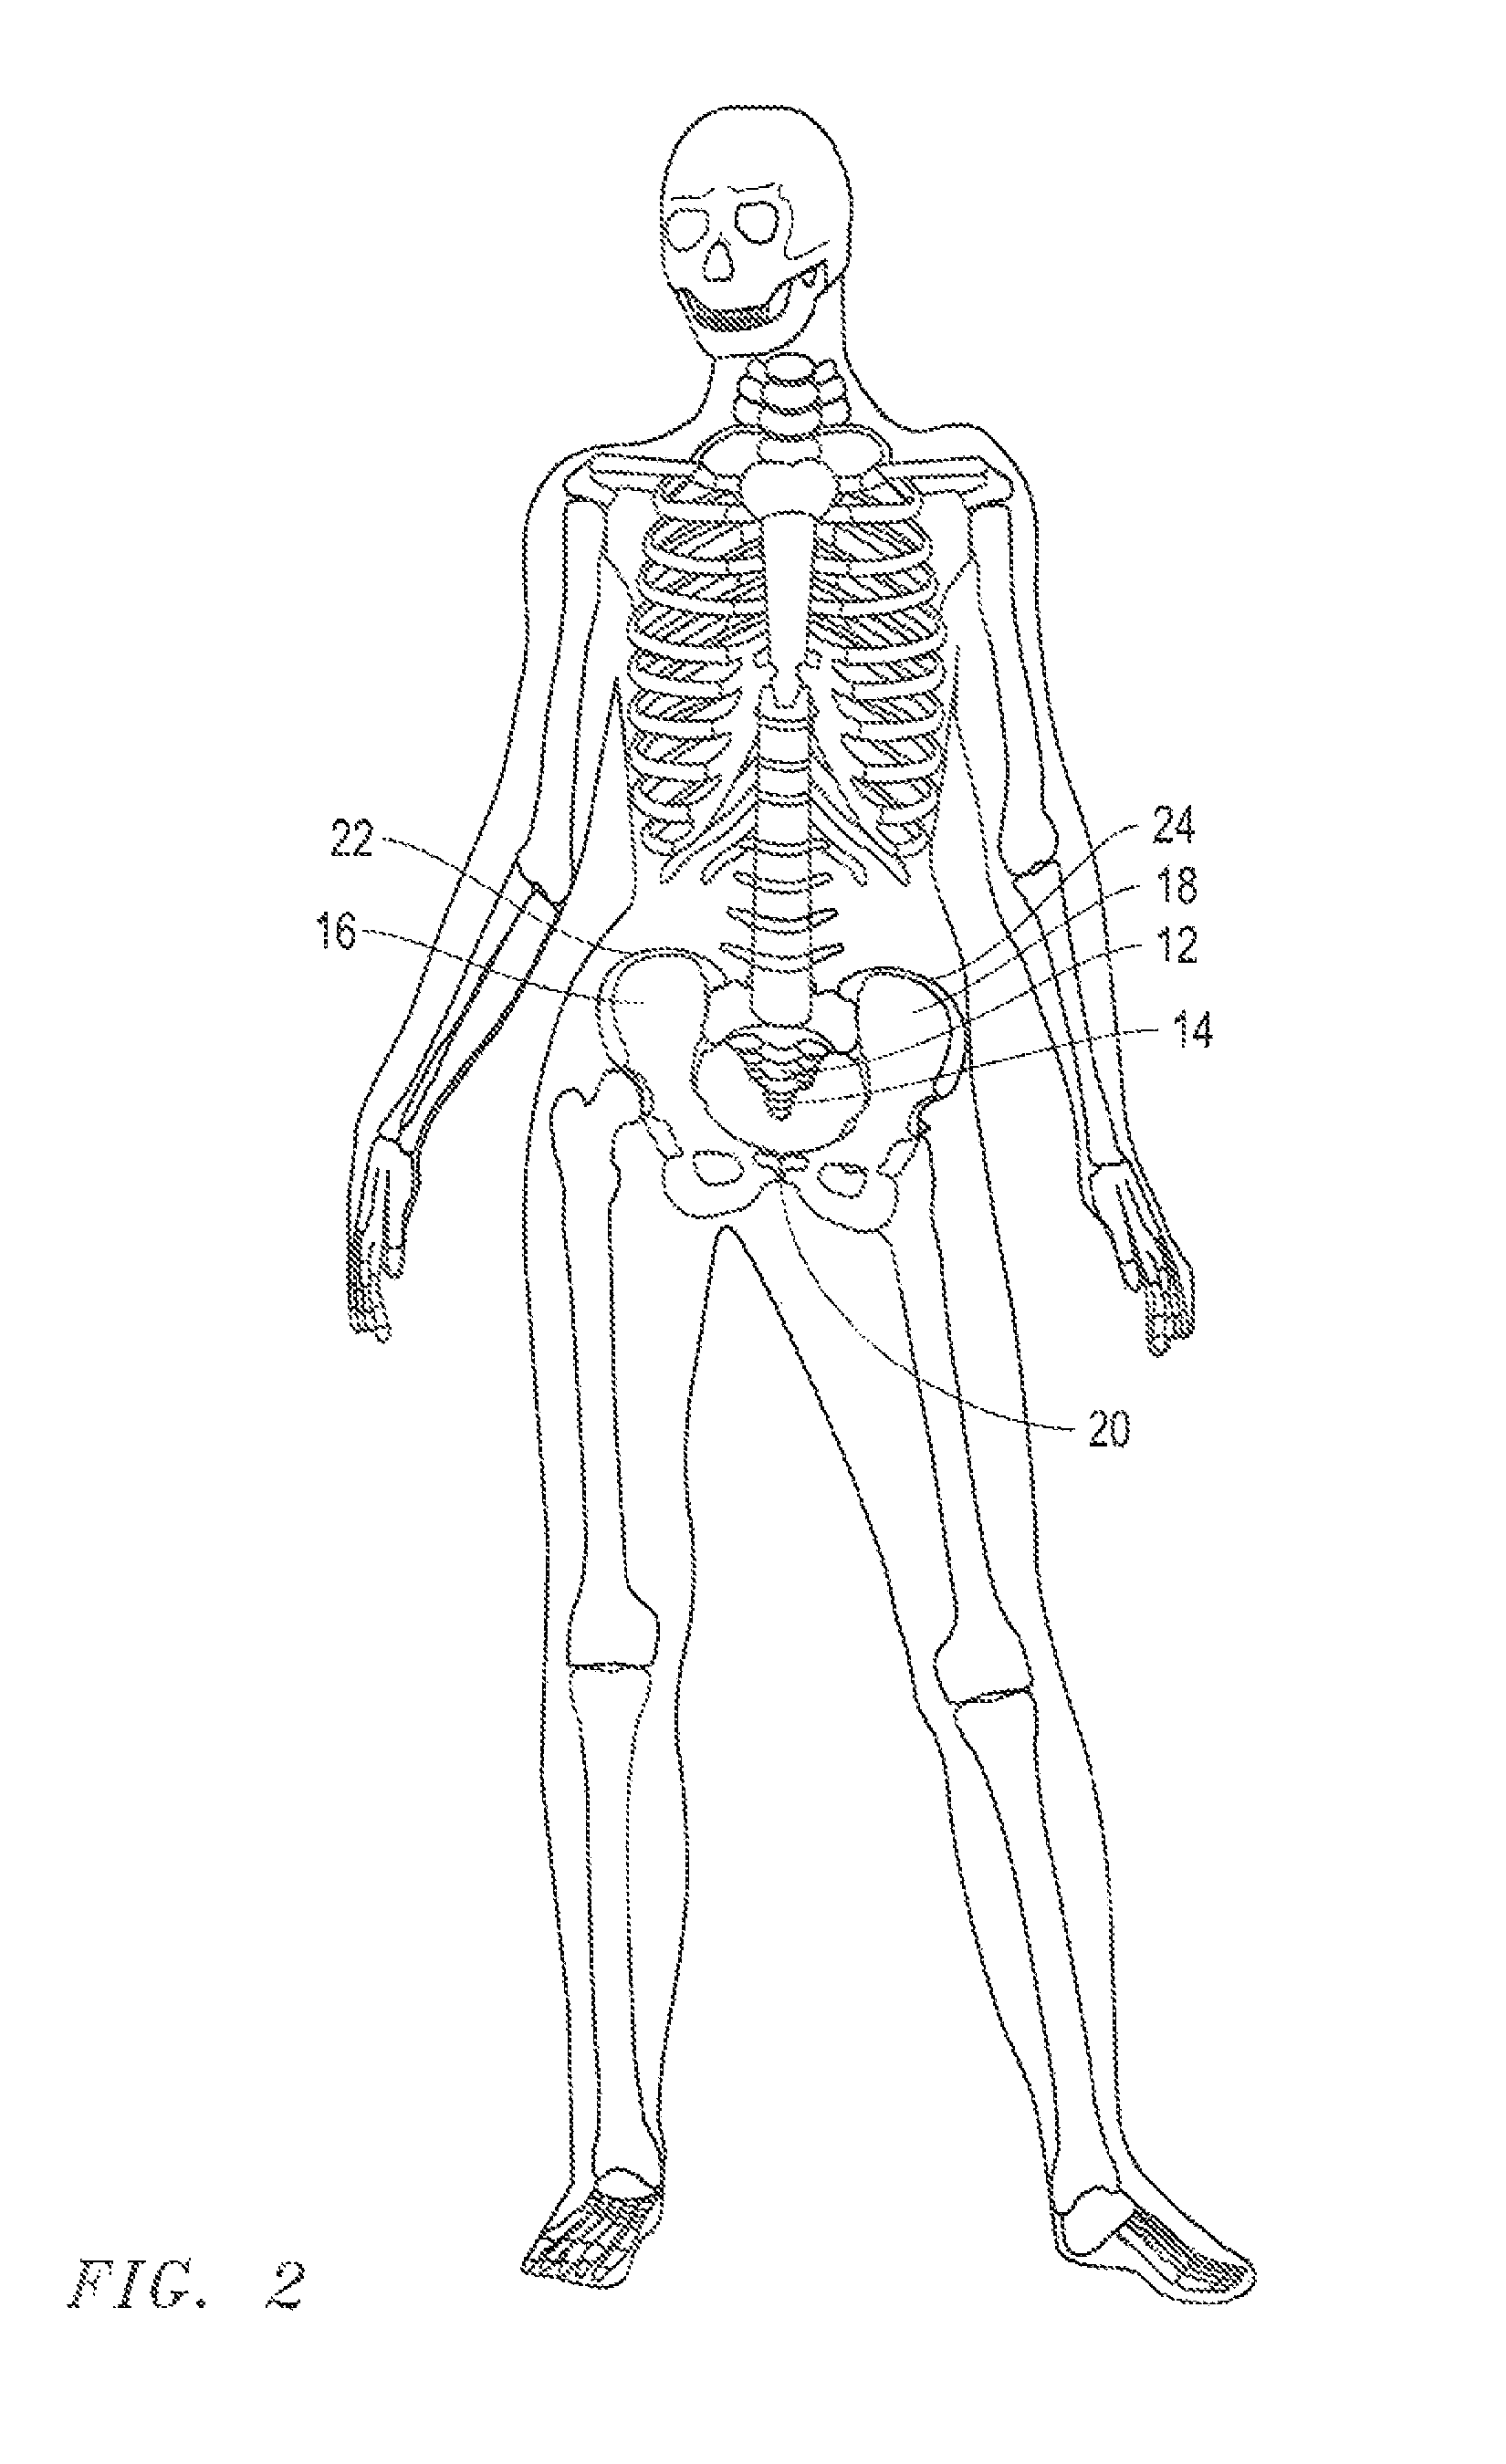 Adjustable pelvic compression belt and methods for reducing the width of a user's hips